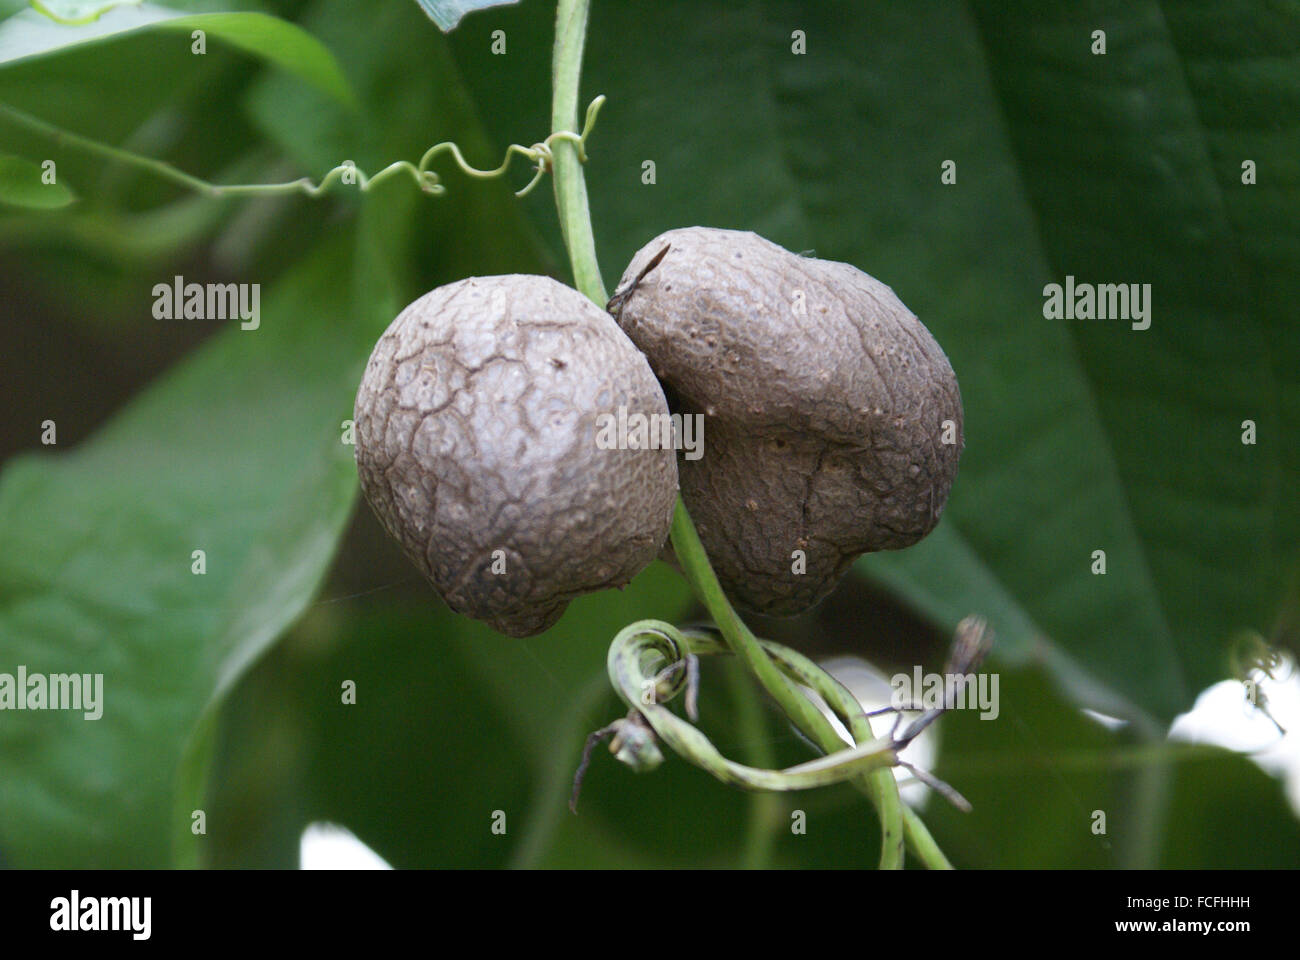 Dioscorea alata, purple yam, tuberous root vegetable with climbing planrs with heart shaped leaves, globose aerial bulbils, Stock Photo